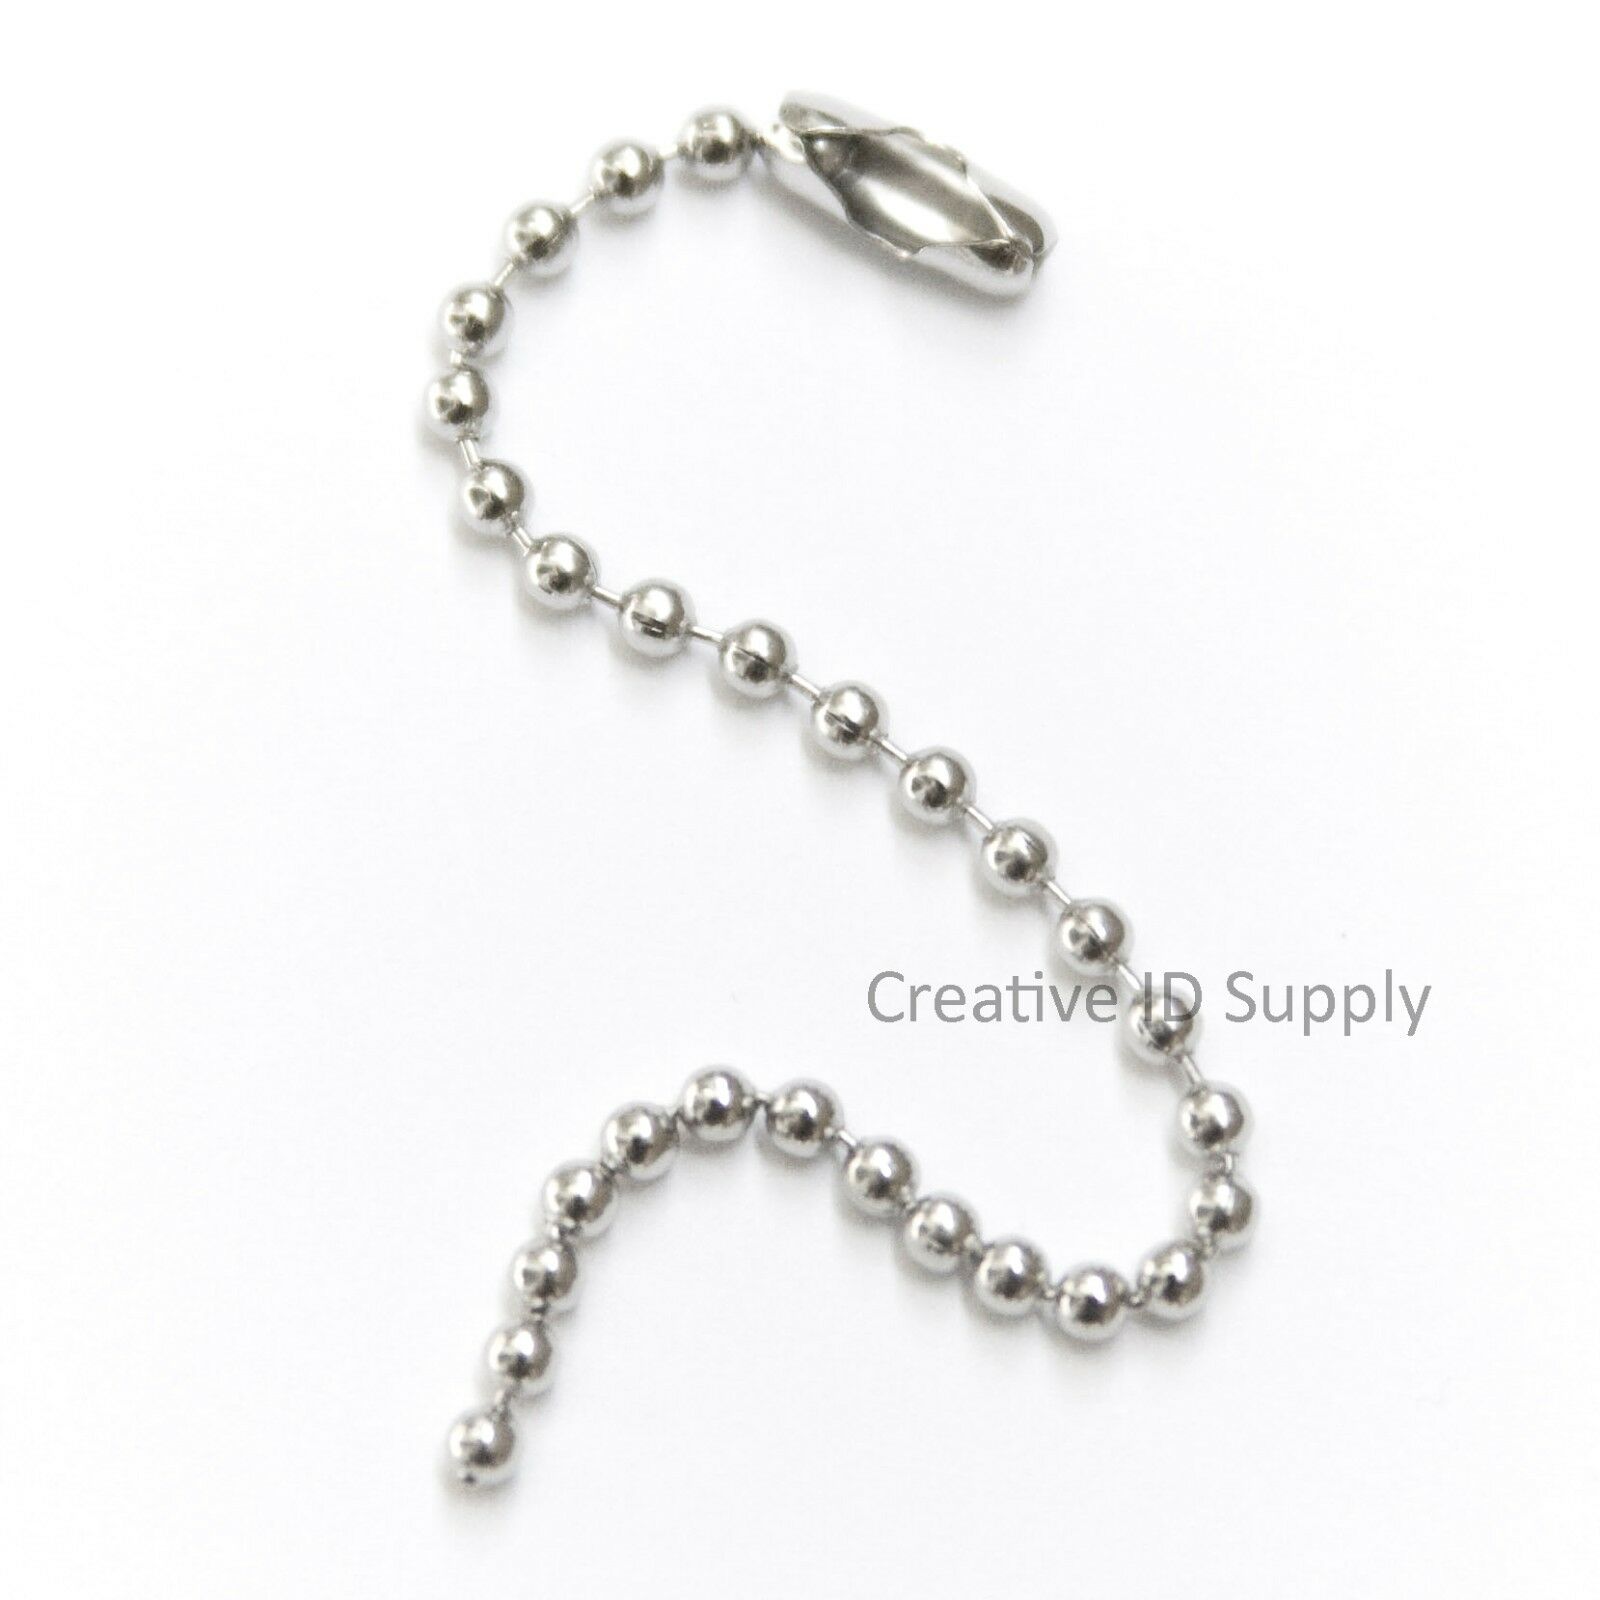 Lot 25 Pcs 4" Tag Chains Ball Chains Key Chains 2.4mm Bead Nickel Plated Silver